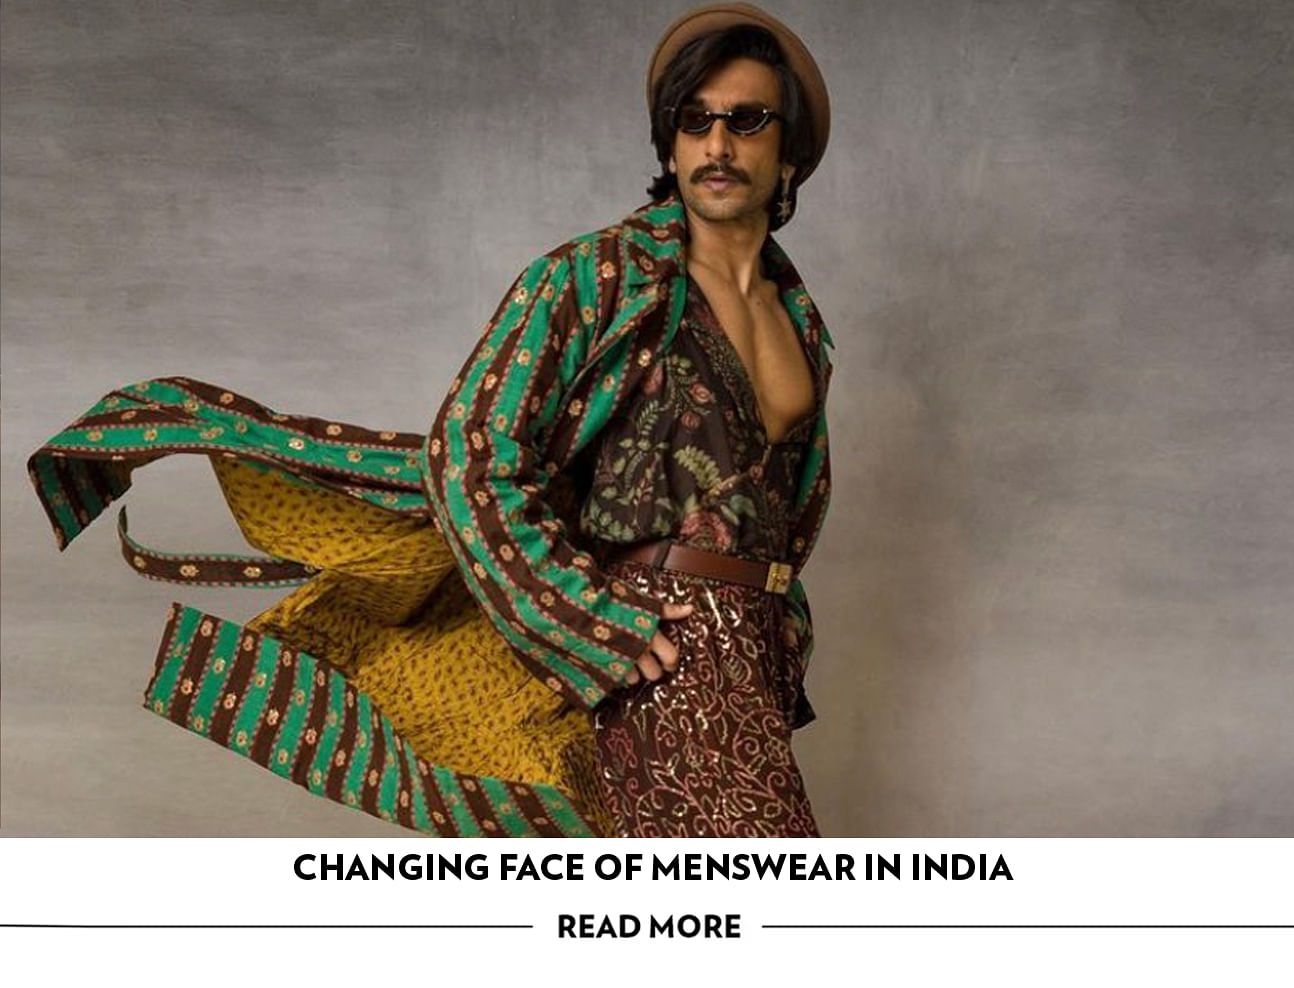 The changing face of contemporary menswear in India